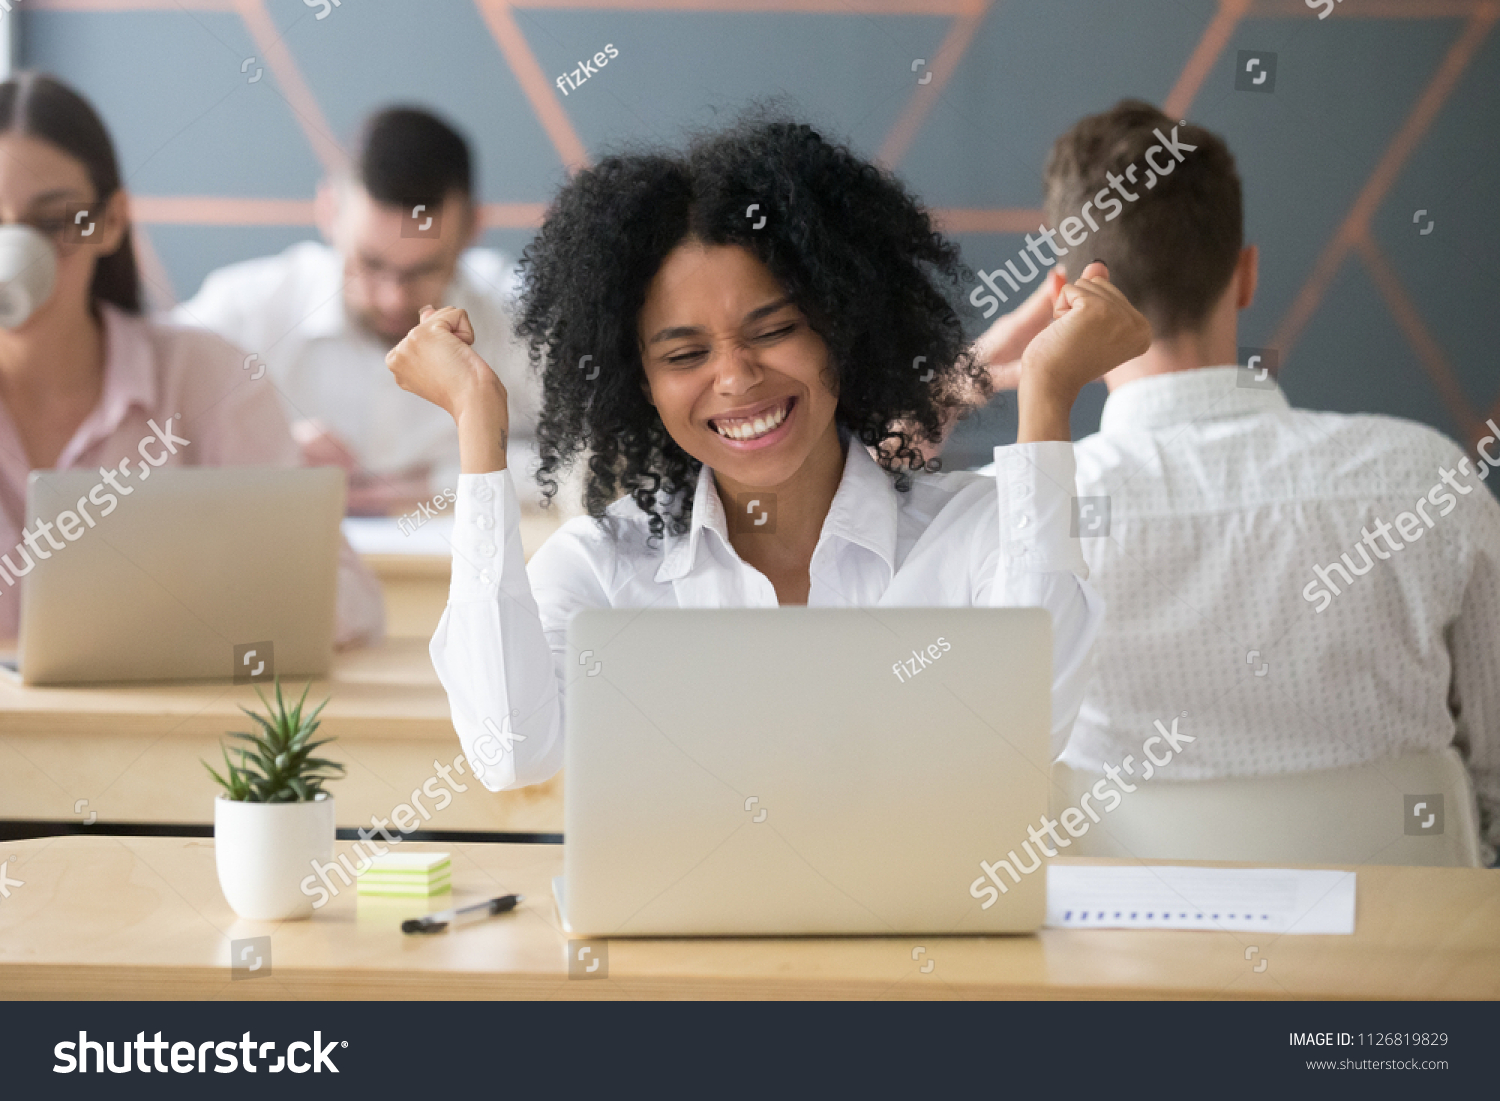 Excited African American worker screaming with happiness winning online lottery, happy black employee getting promotion letter at laptop, relocating to dream position. Rewarding concept #1126819829